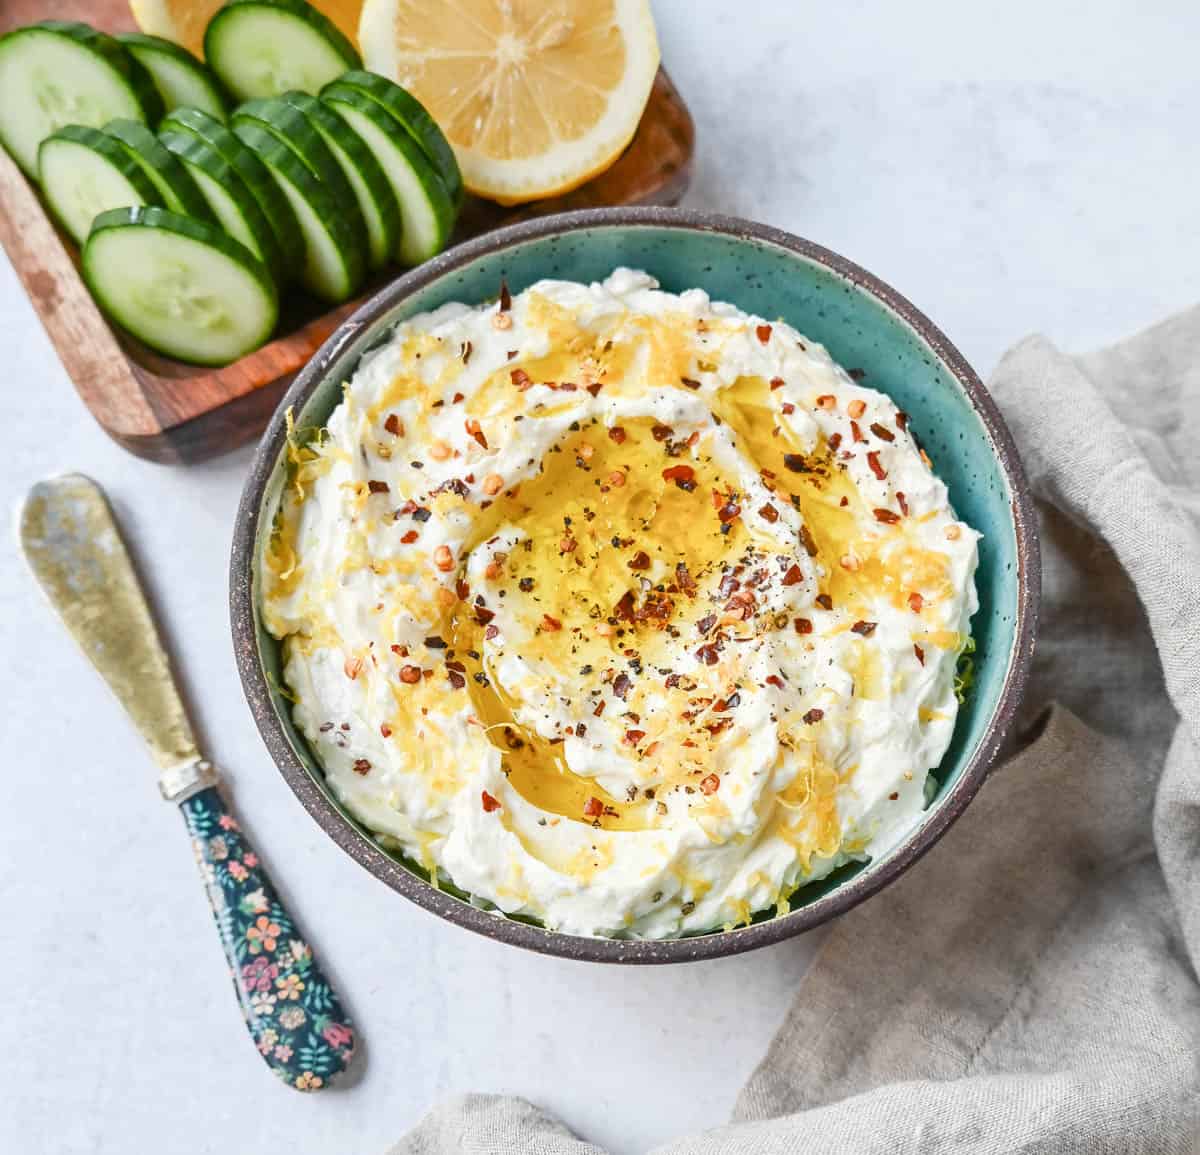 Simple and creamy whipped feta cheese dip is the perfect appetizer! Mediterranean feta cheese is whipped with cream cheese, a touch of mayo, lemon zest, and warm spices. Fresh and tangy, it pairs perfectly with warm pita bread and veggies!